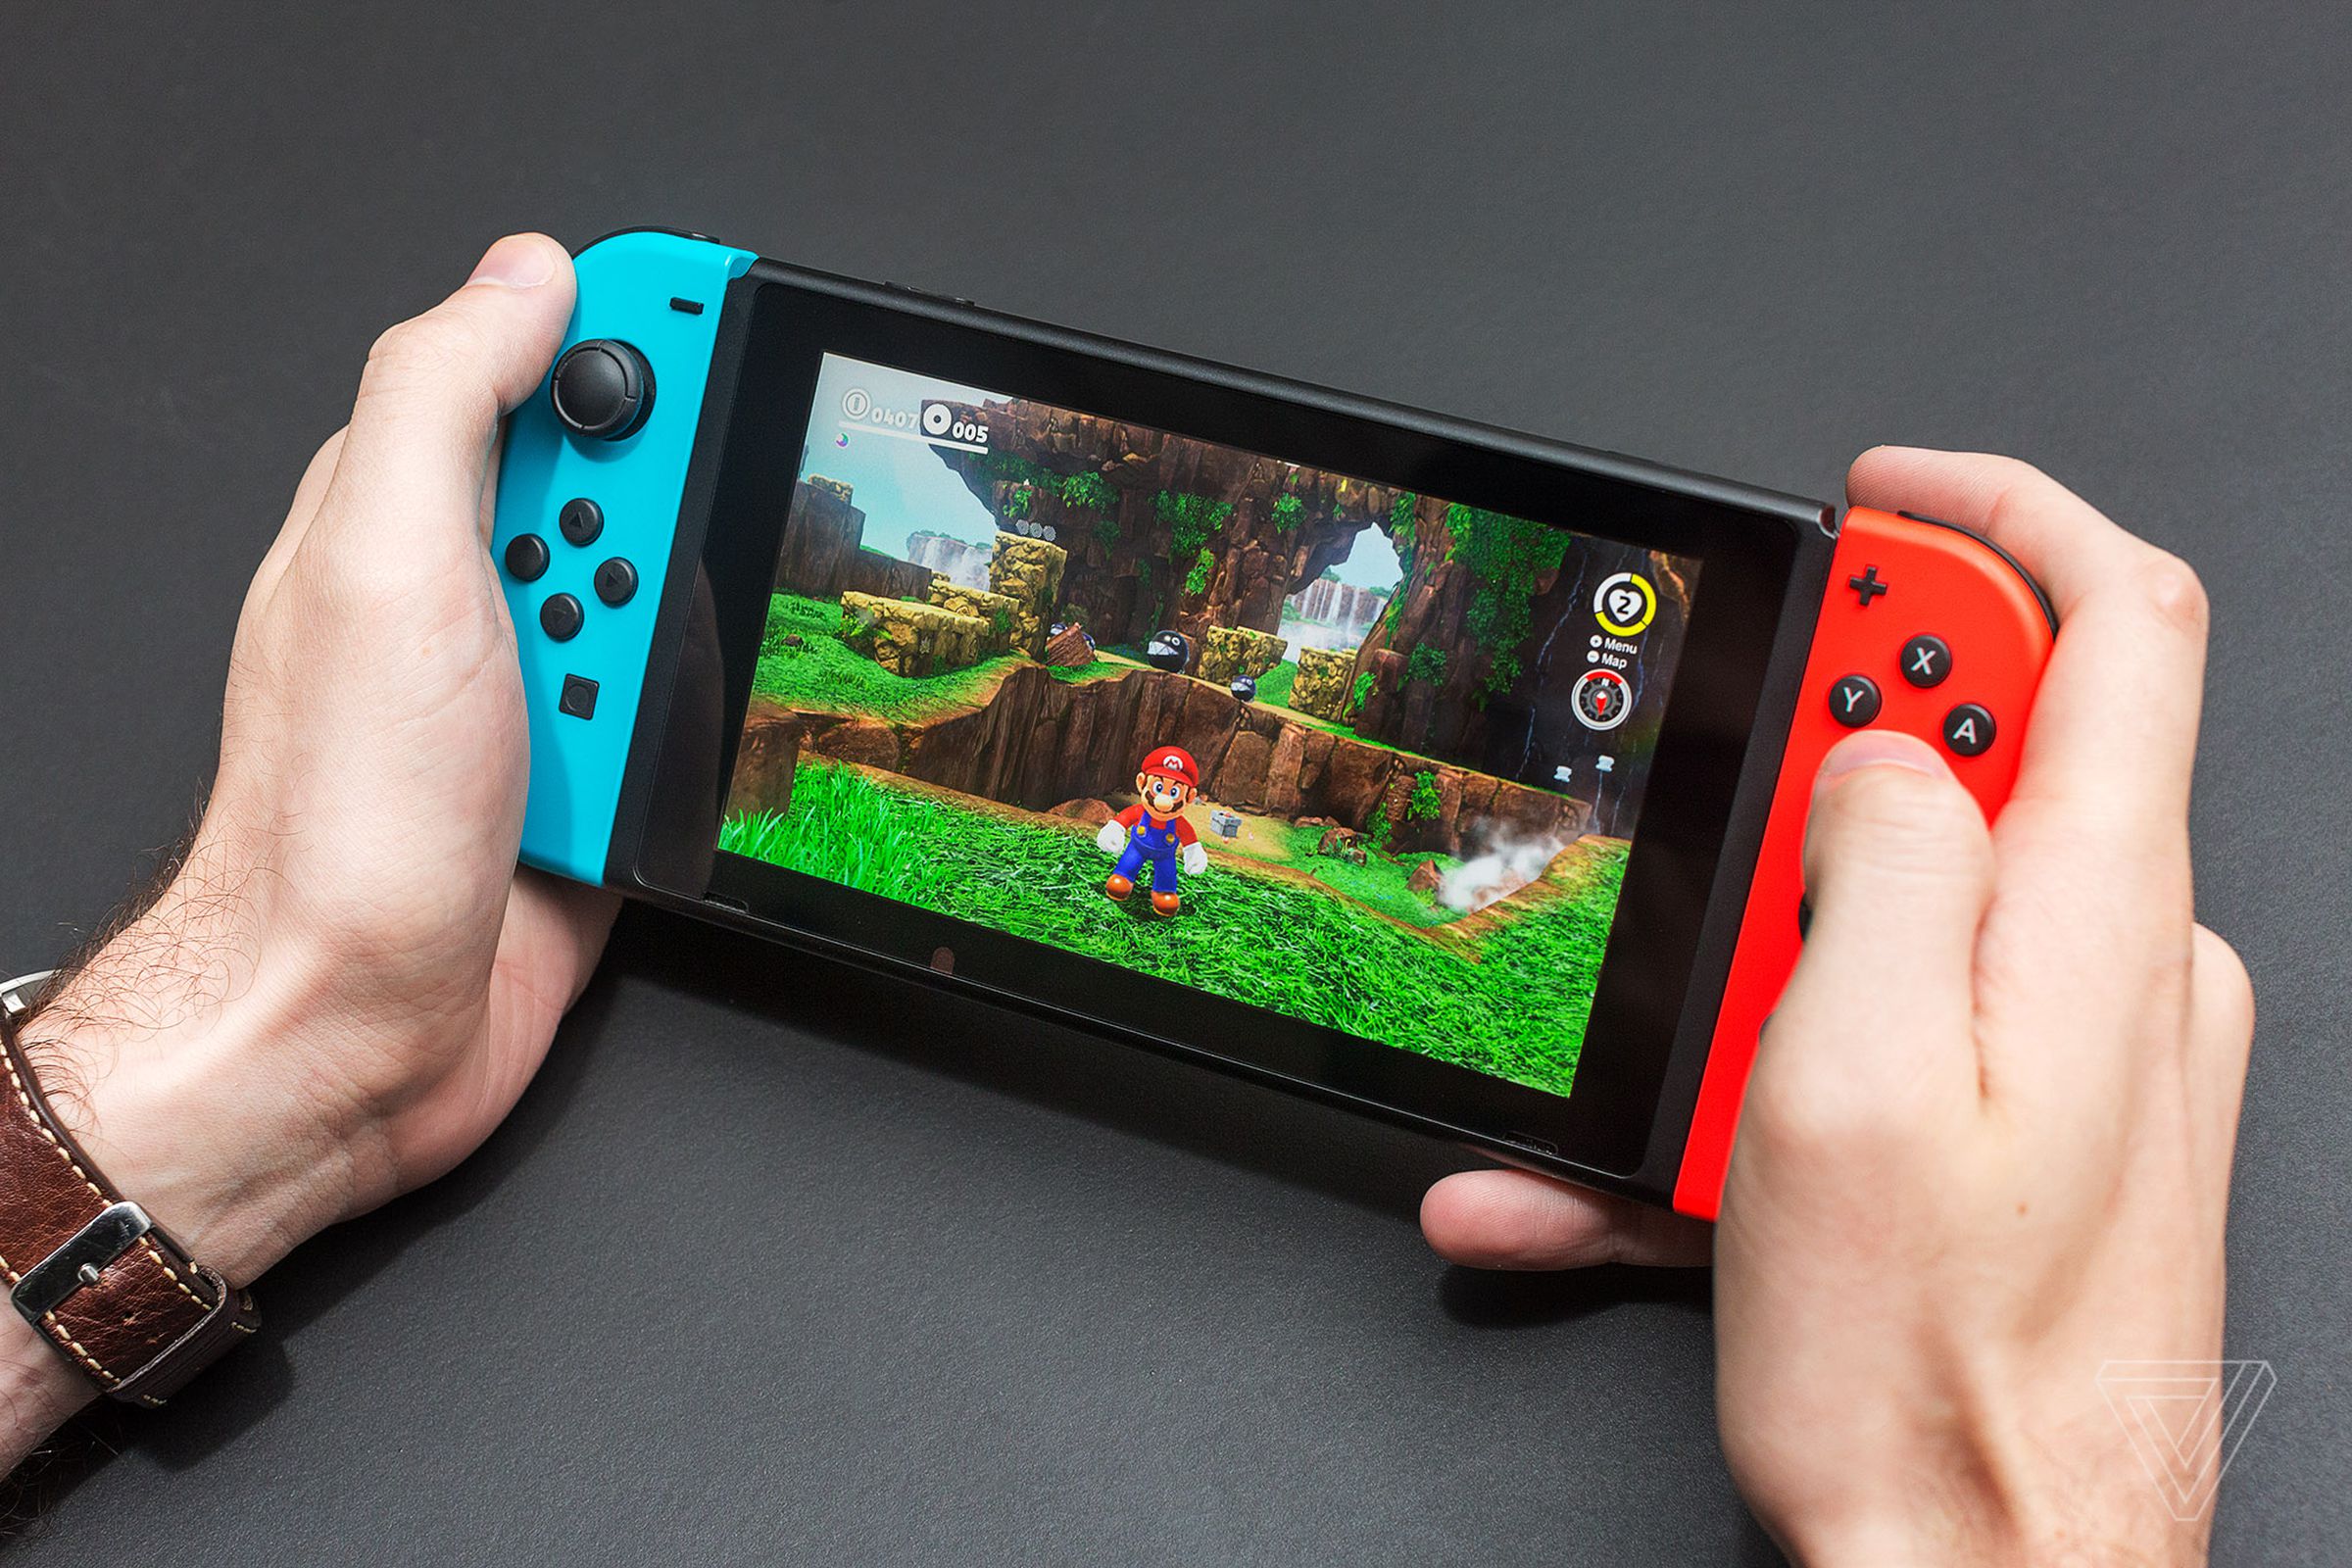 Today’s deal is on the standard Switch with neon blue and red Joy-Cons.